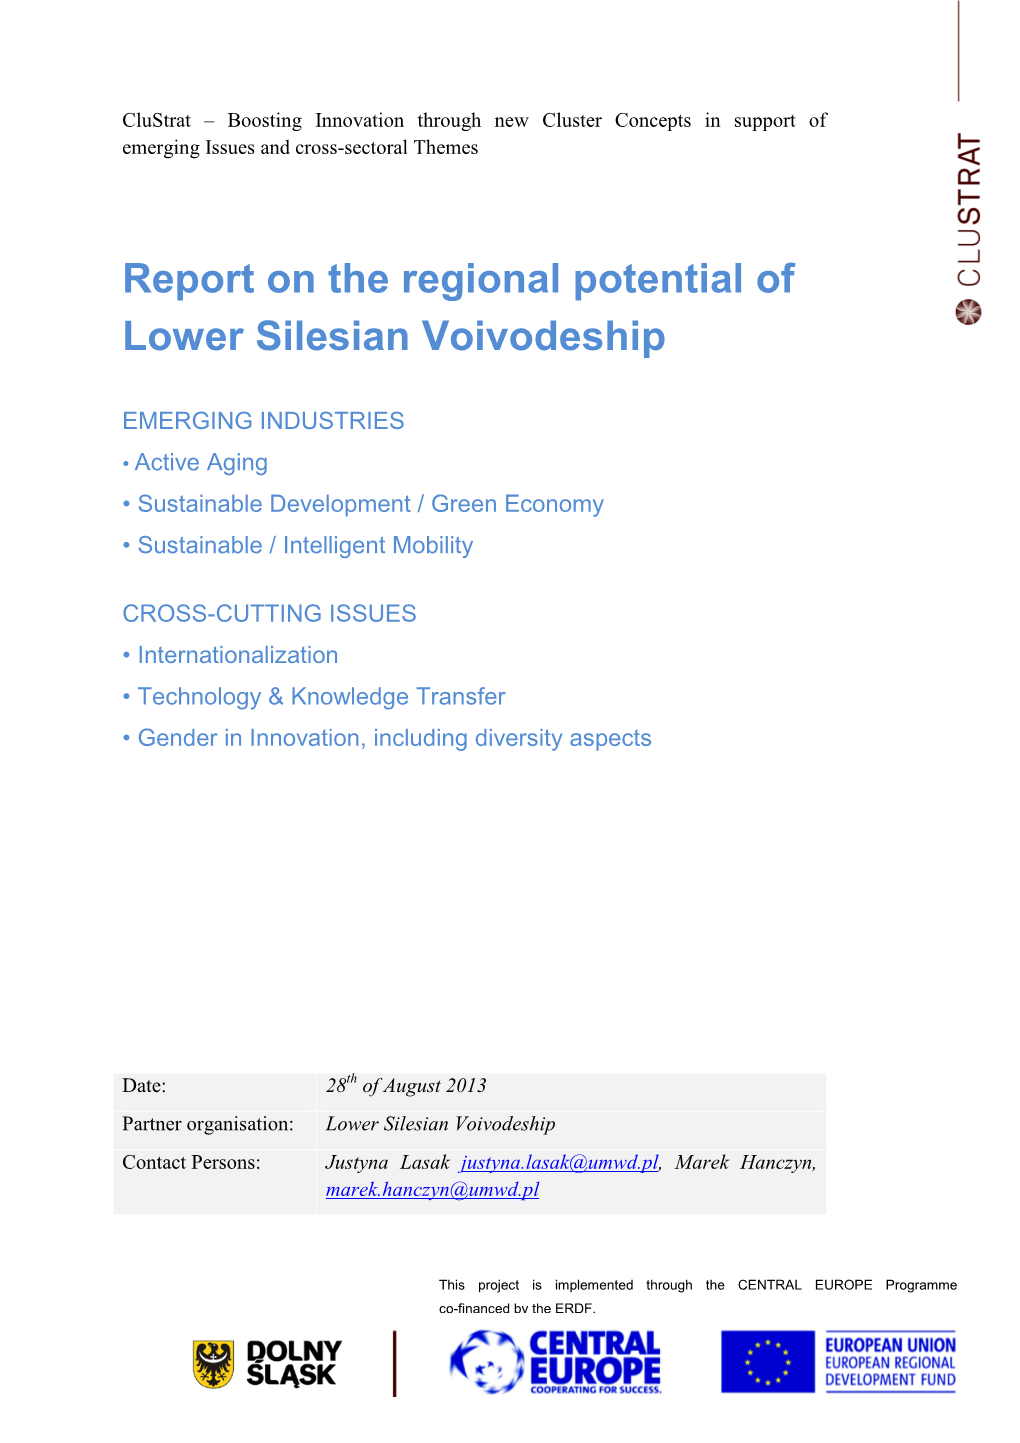 Report on the Regional Potential of Lower Silesian Voivodeship